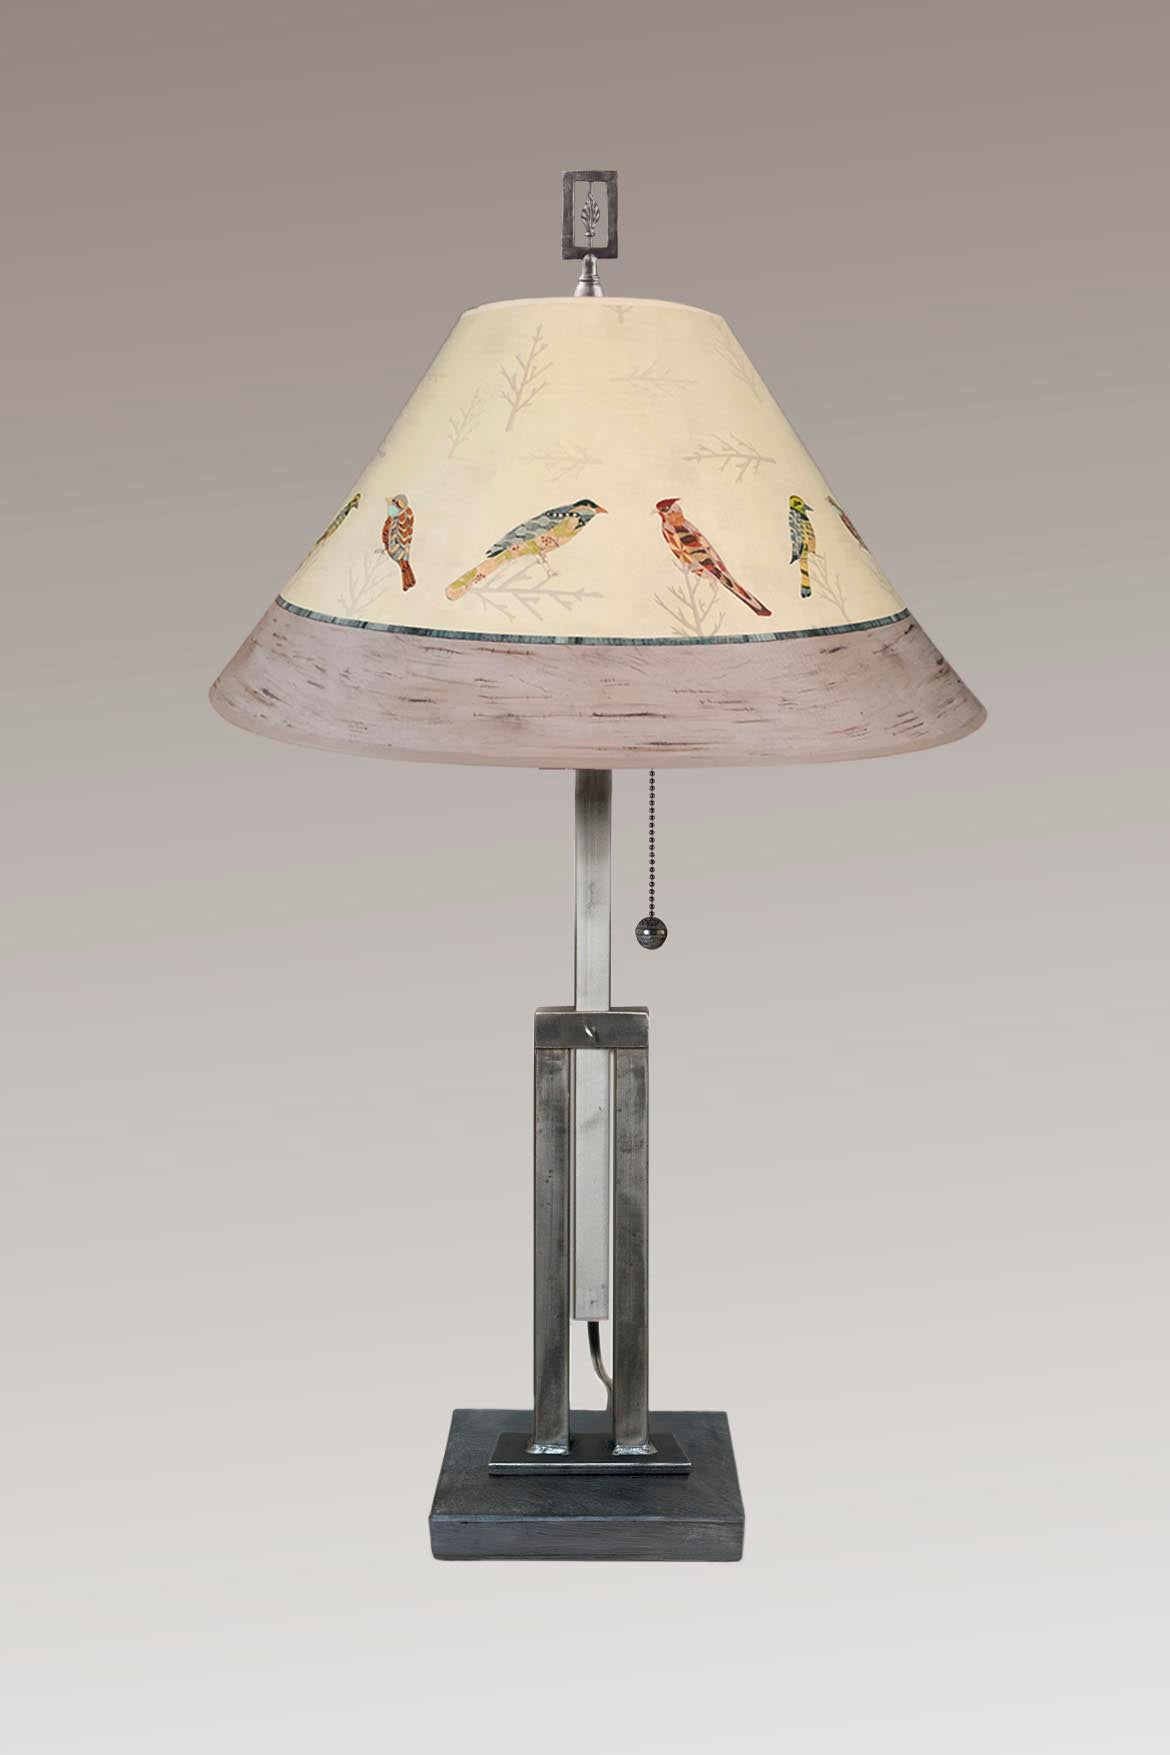 Janna Ugone &amp; Co Table Lamps Adjustable-Height Steel Table Lamp with Large Conical Shade in Bird Friends